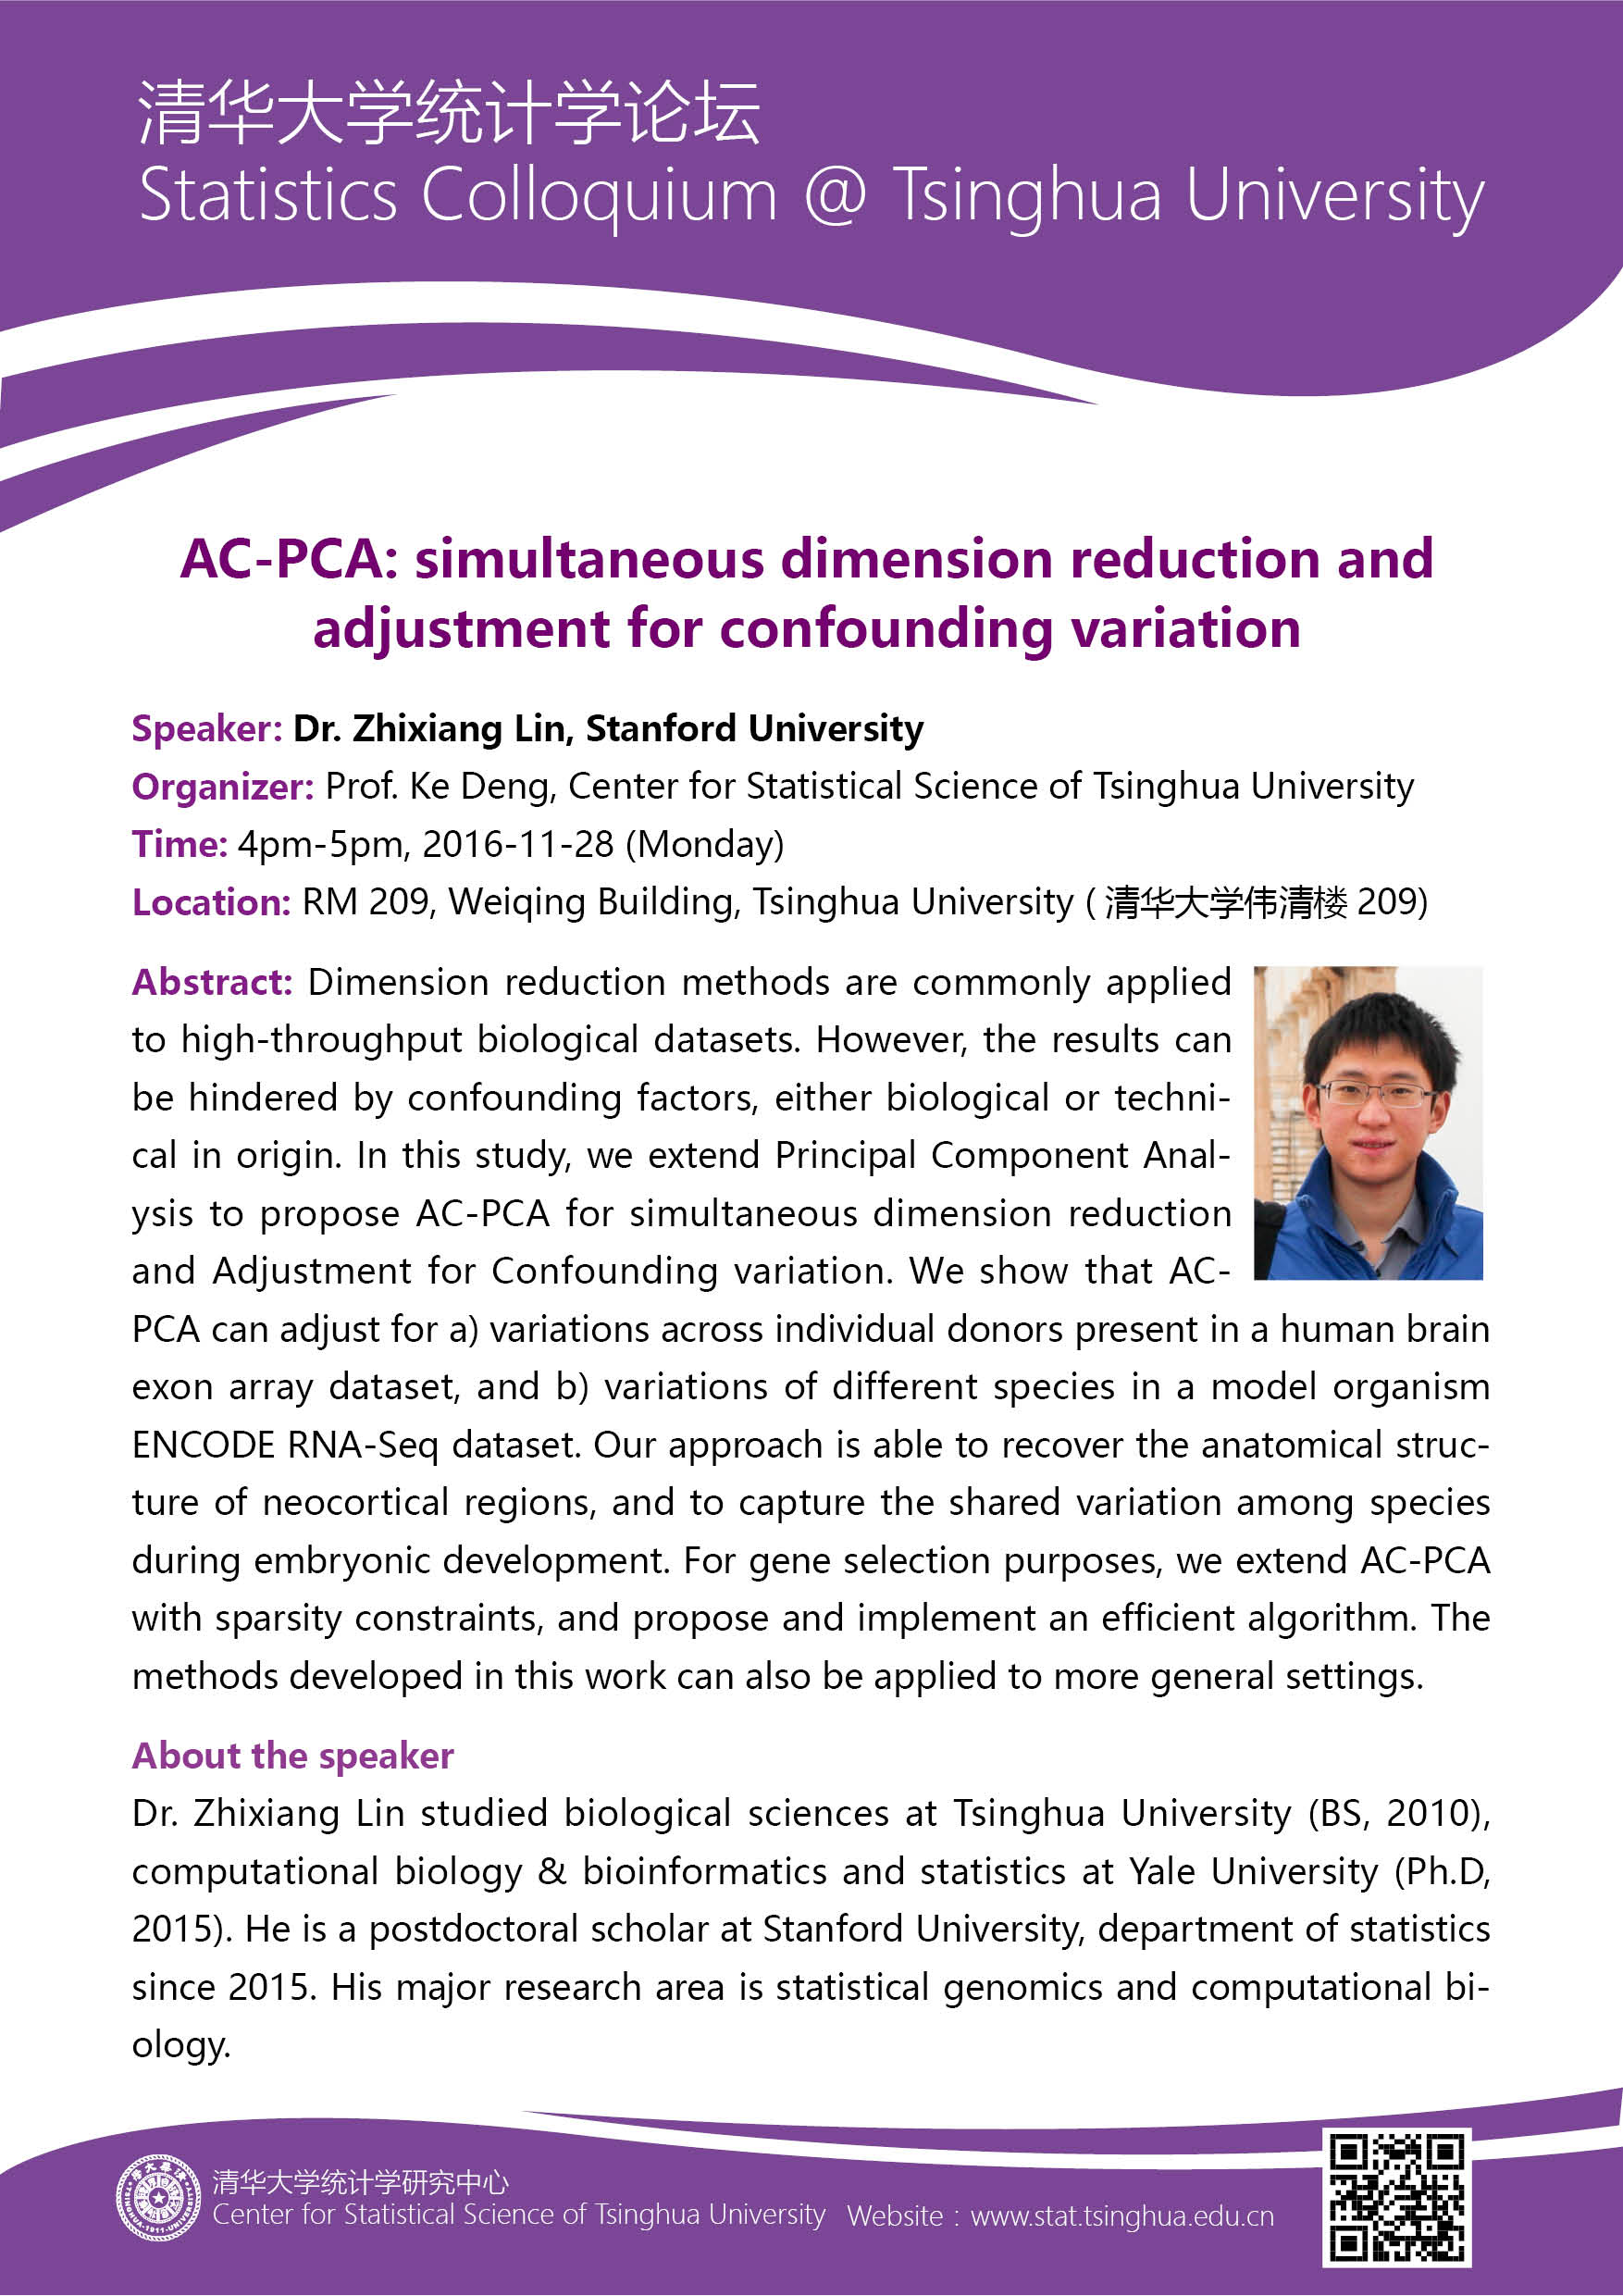 AC-PCA: Simultaneous Dimension Reduction and Adjustment for Confounding Variation